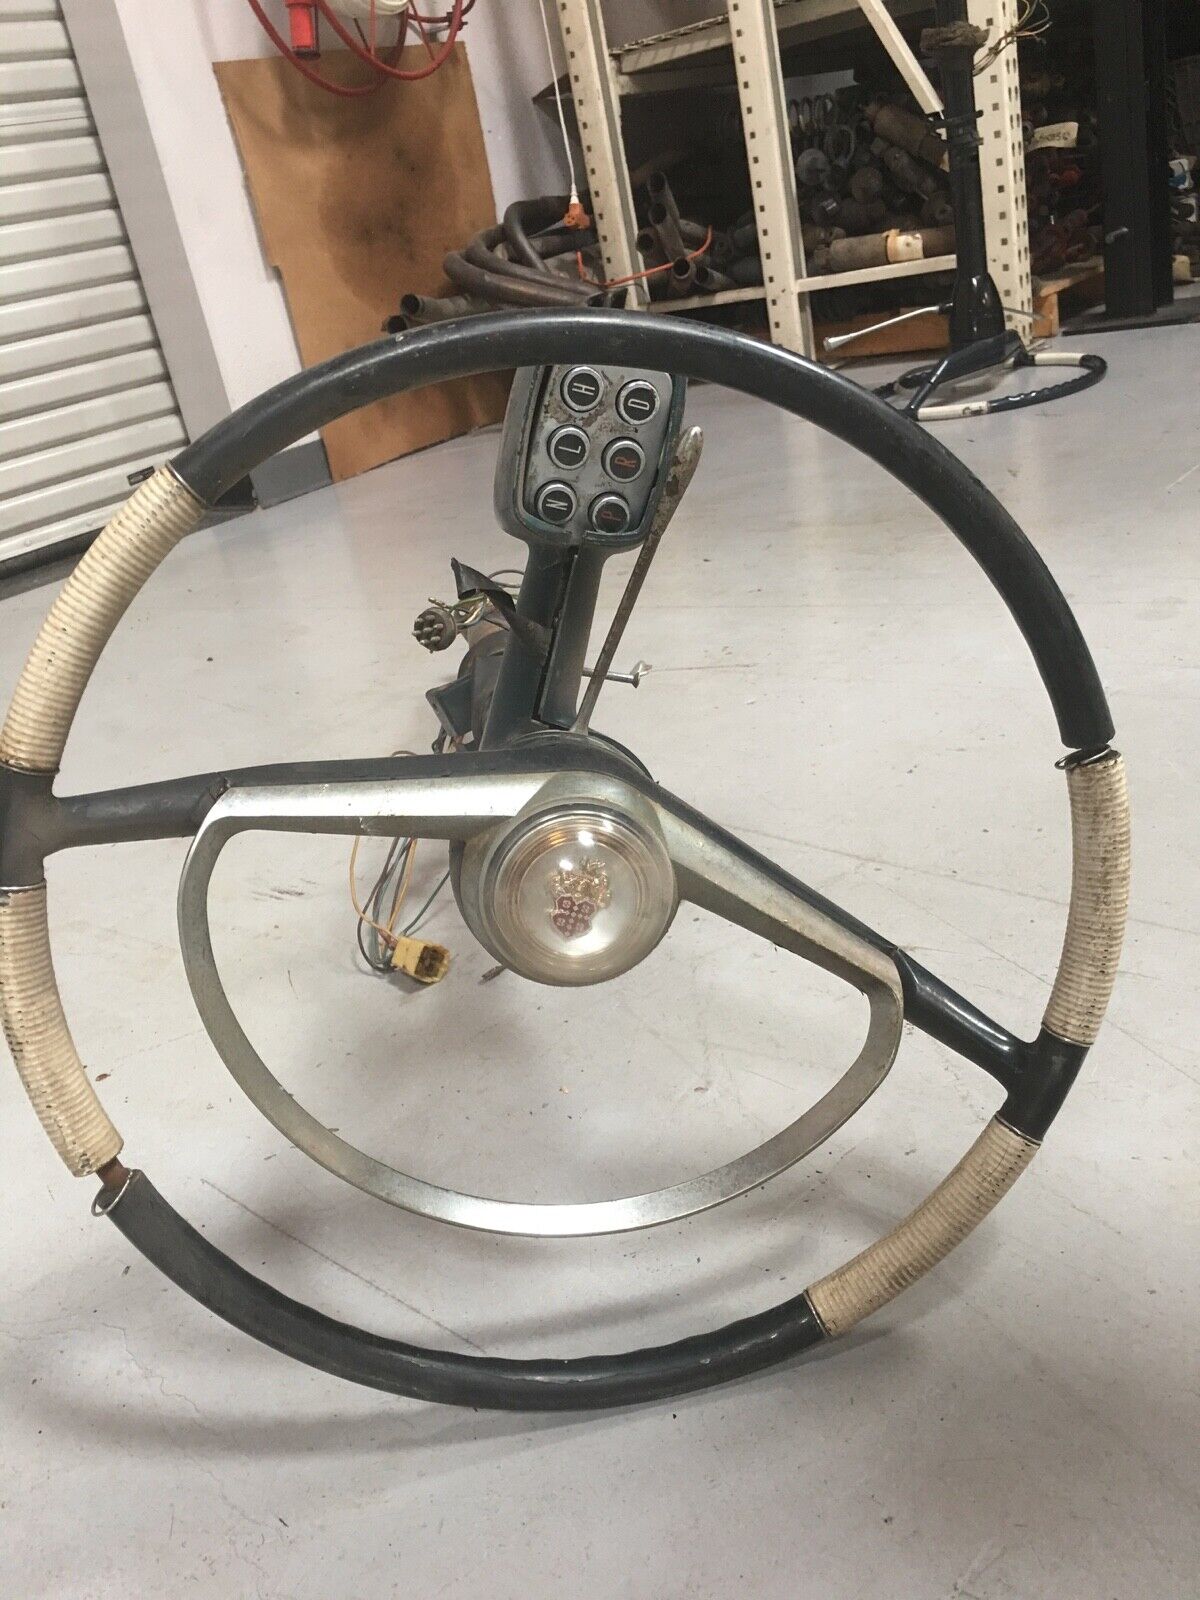 1956 Packard Caribbean Steering Column with Steering Wheel and Push Botton Shift